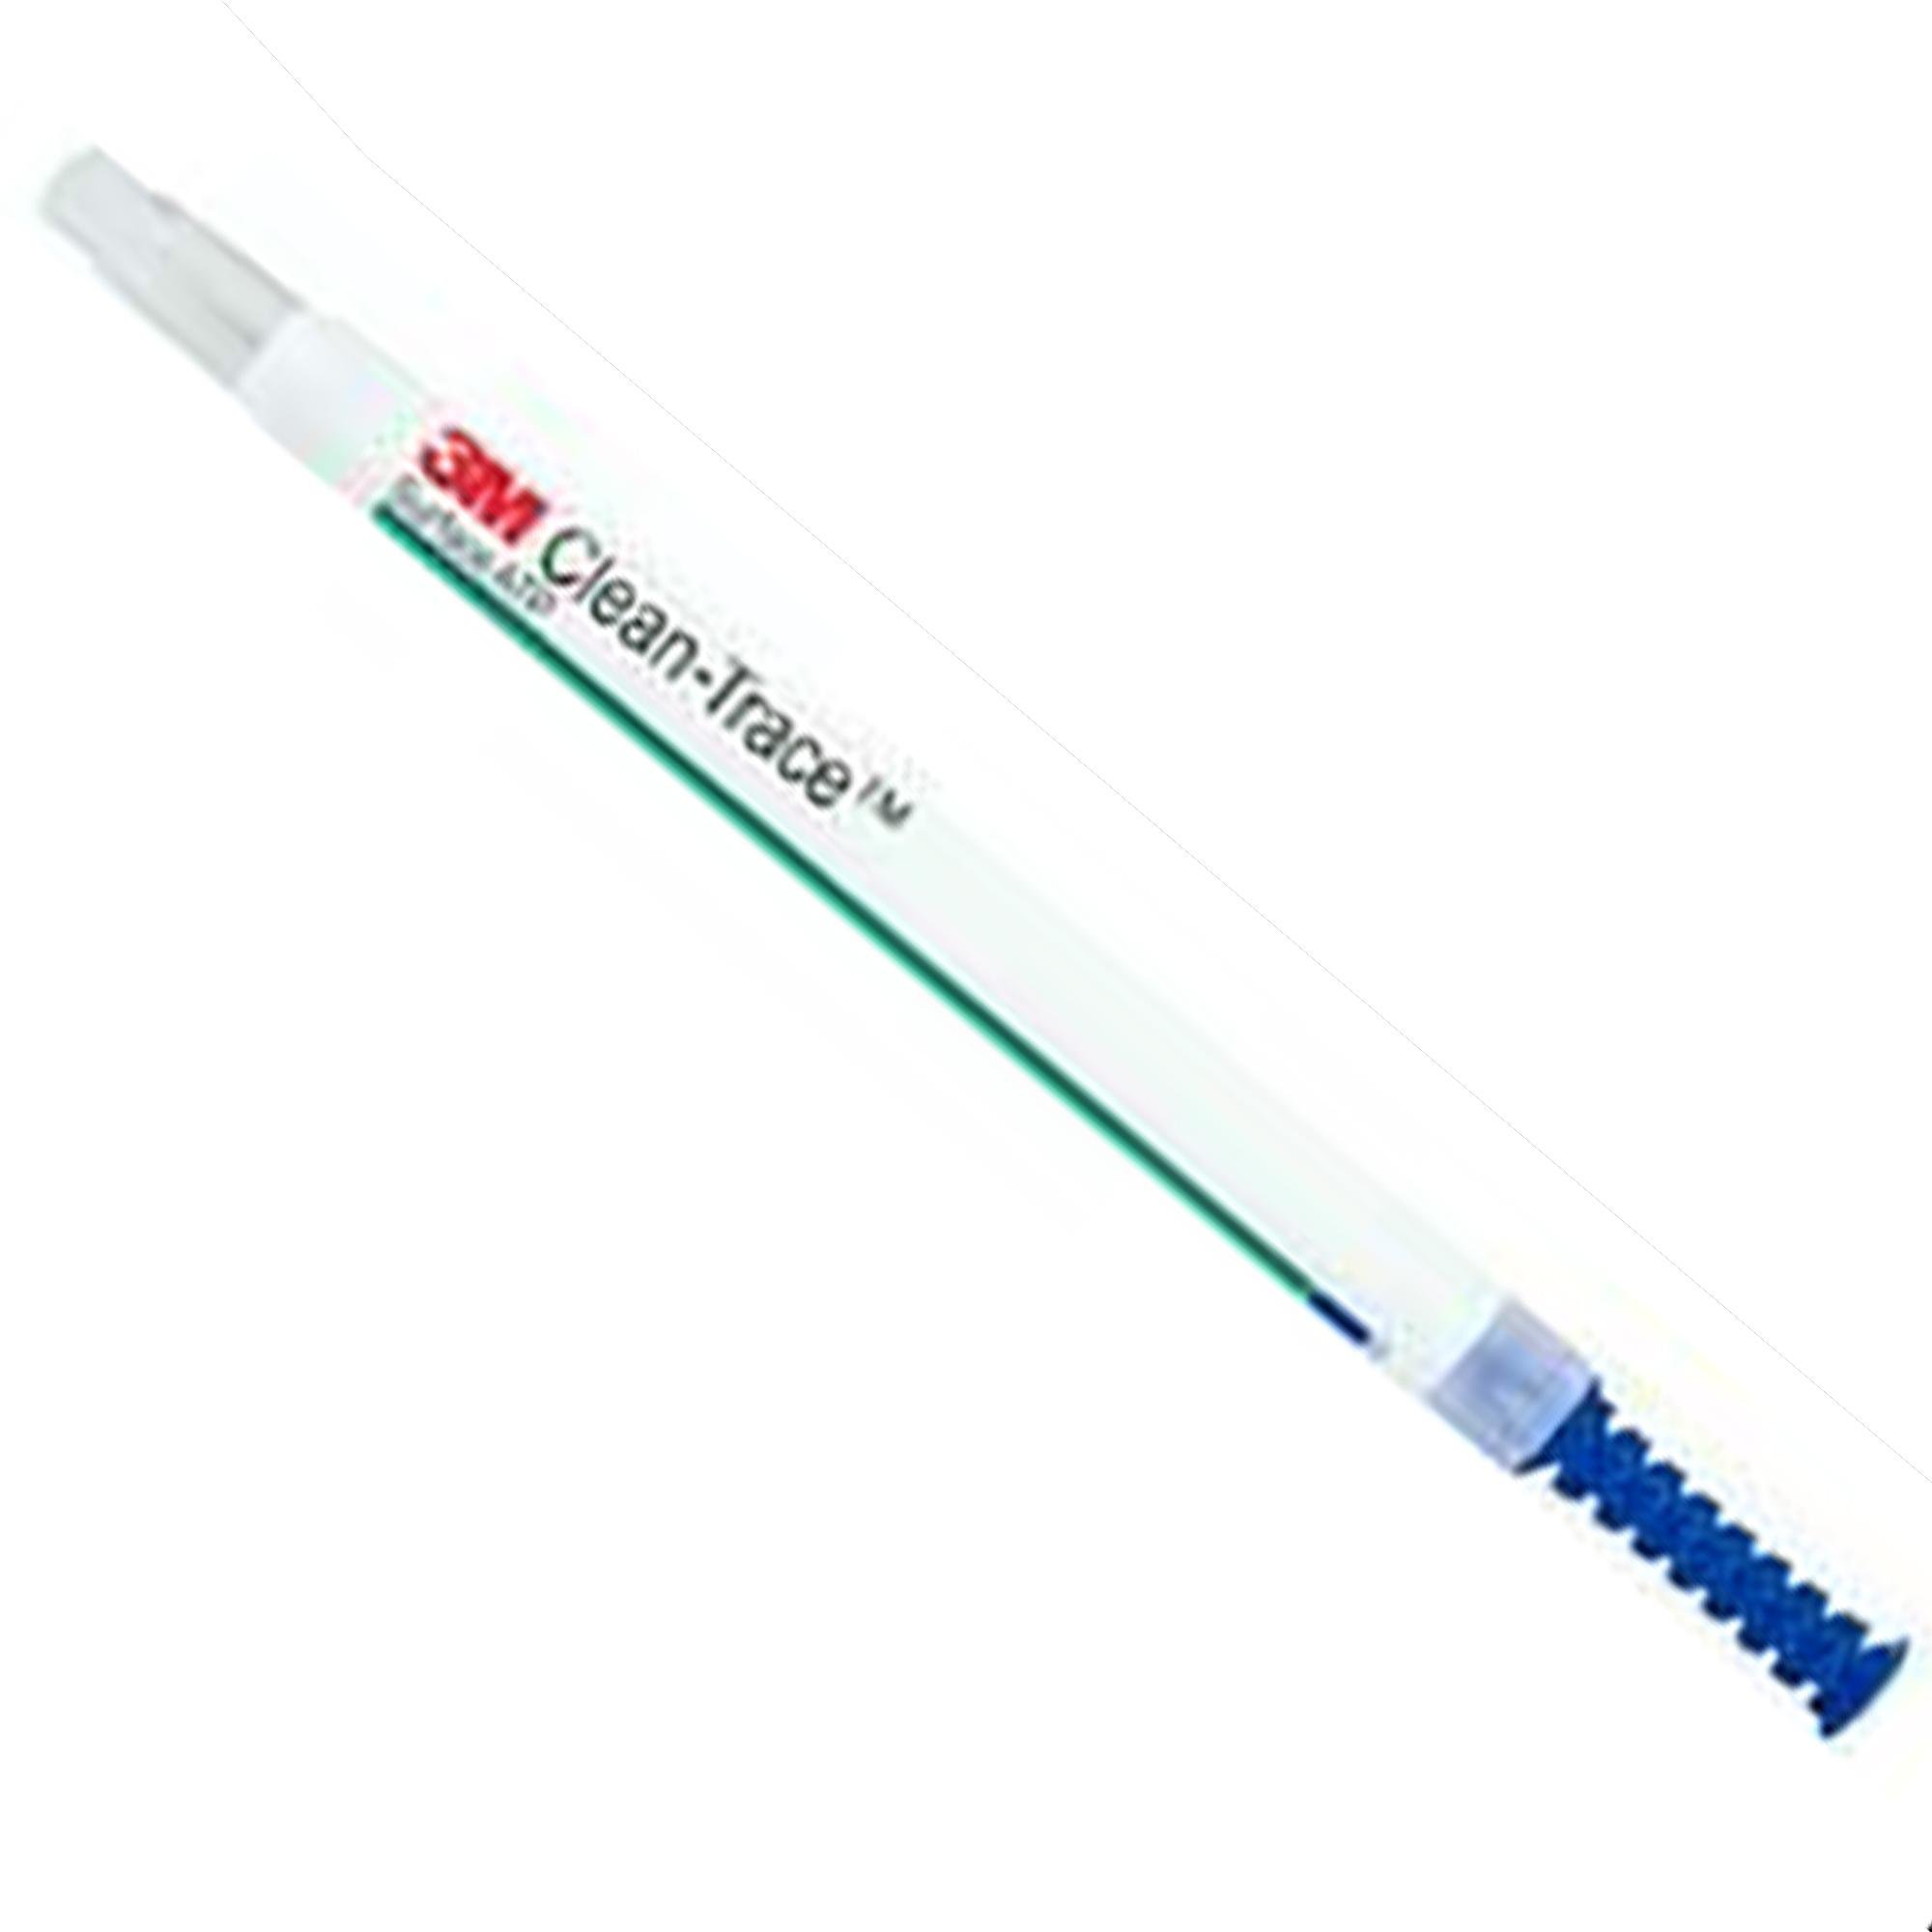 D426430%20%203m-clean-trace-surface-atp-test-swabs%202000x2000px-1.jpg